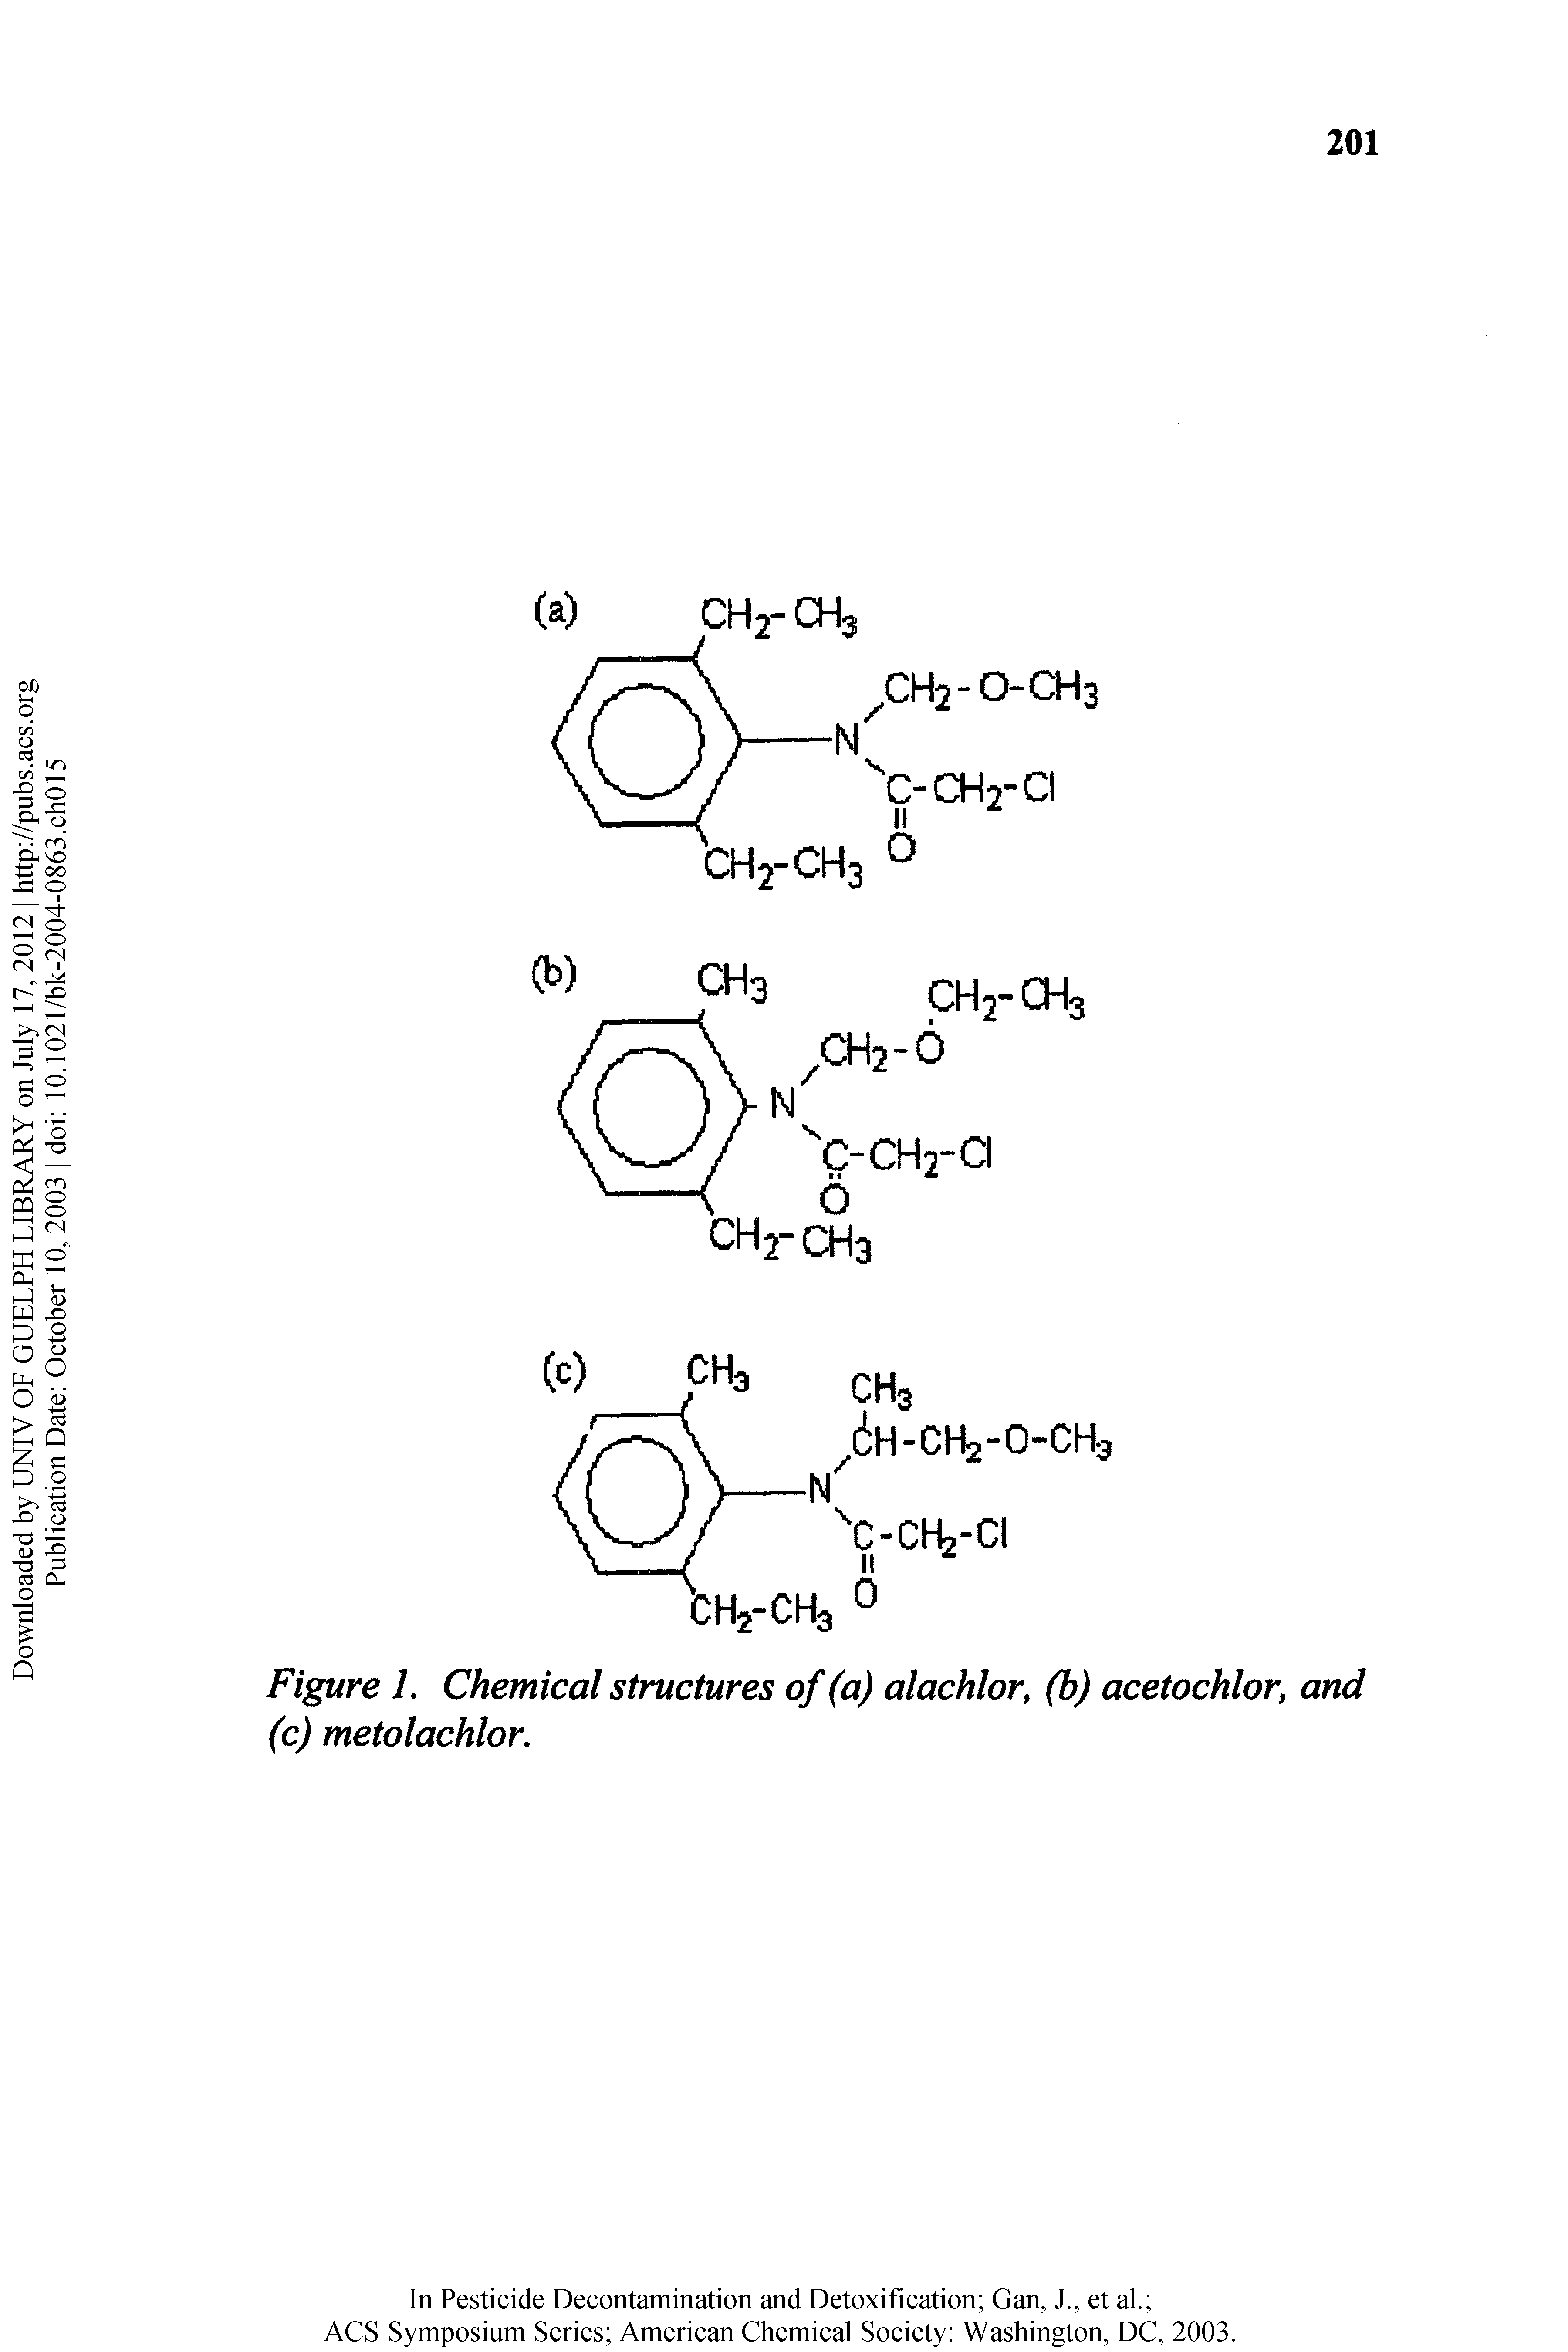 Figure 1. Chemical structures of (a) alachlor, (b) acetochlor, and (c) metolachlor.